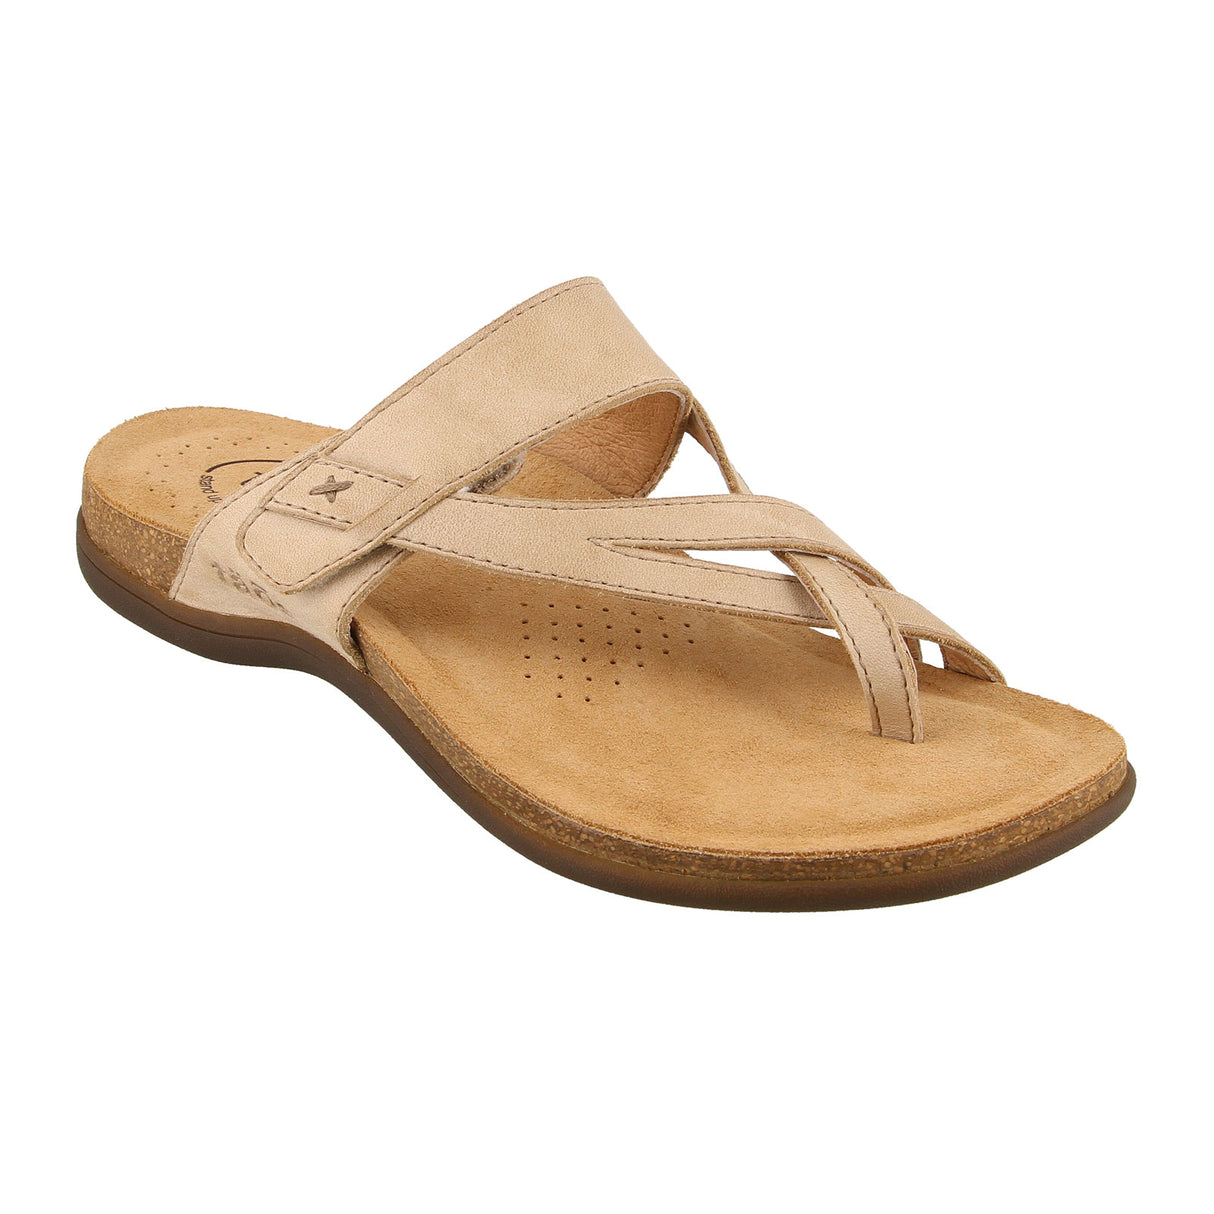 Taos Perfect Thong Sandal (Women) - Stone Sandals - Thong - The Heel Shoe Fitters